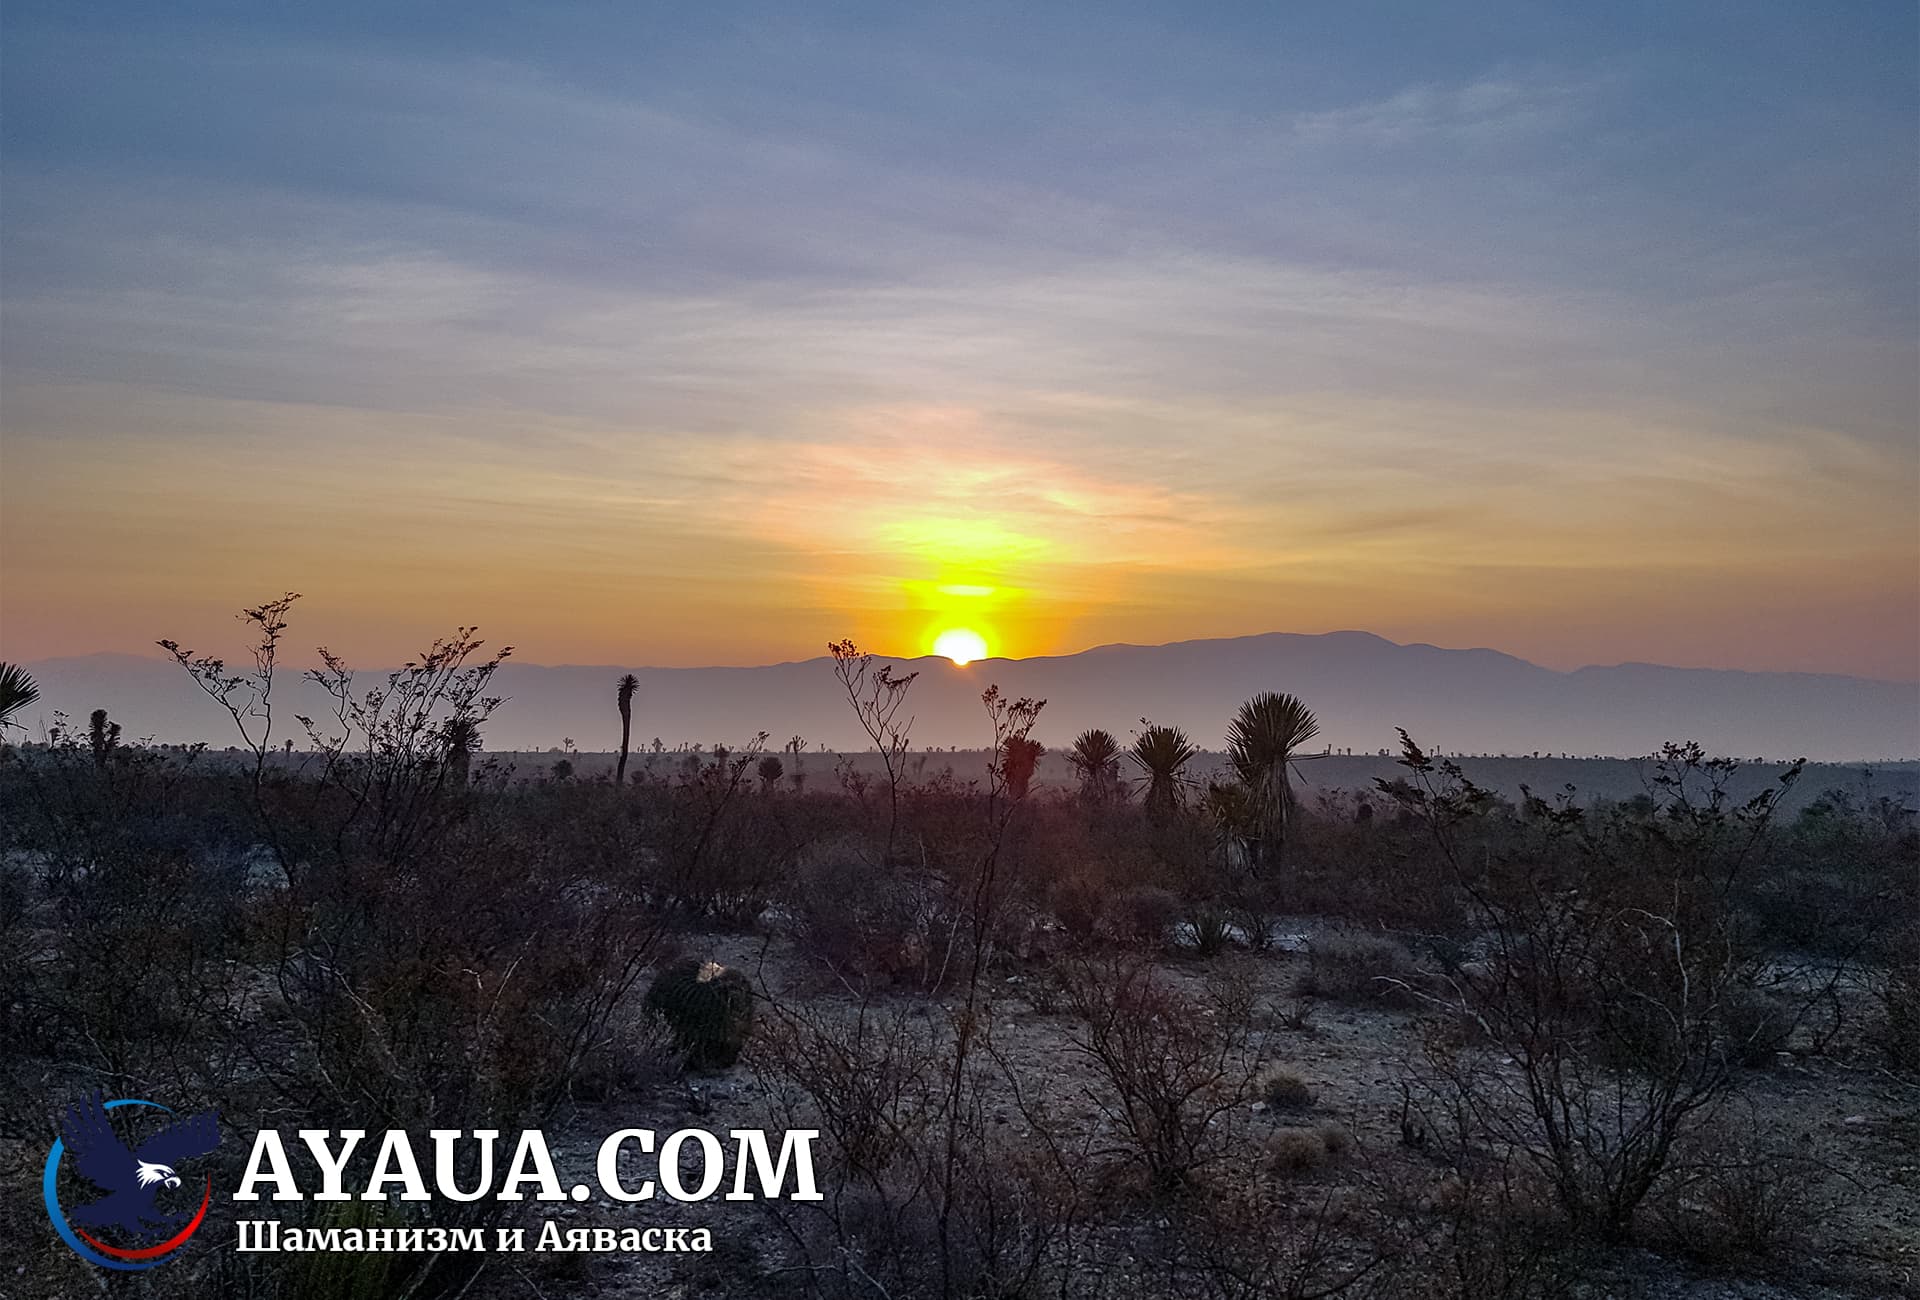 The dawn in the Virikuta desert after a big overnight peyote ceremony. This Mexican desert is a sacred place for the Huichol tribe, a place of power. There, the Peyote cactus grows.